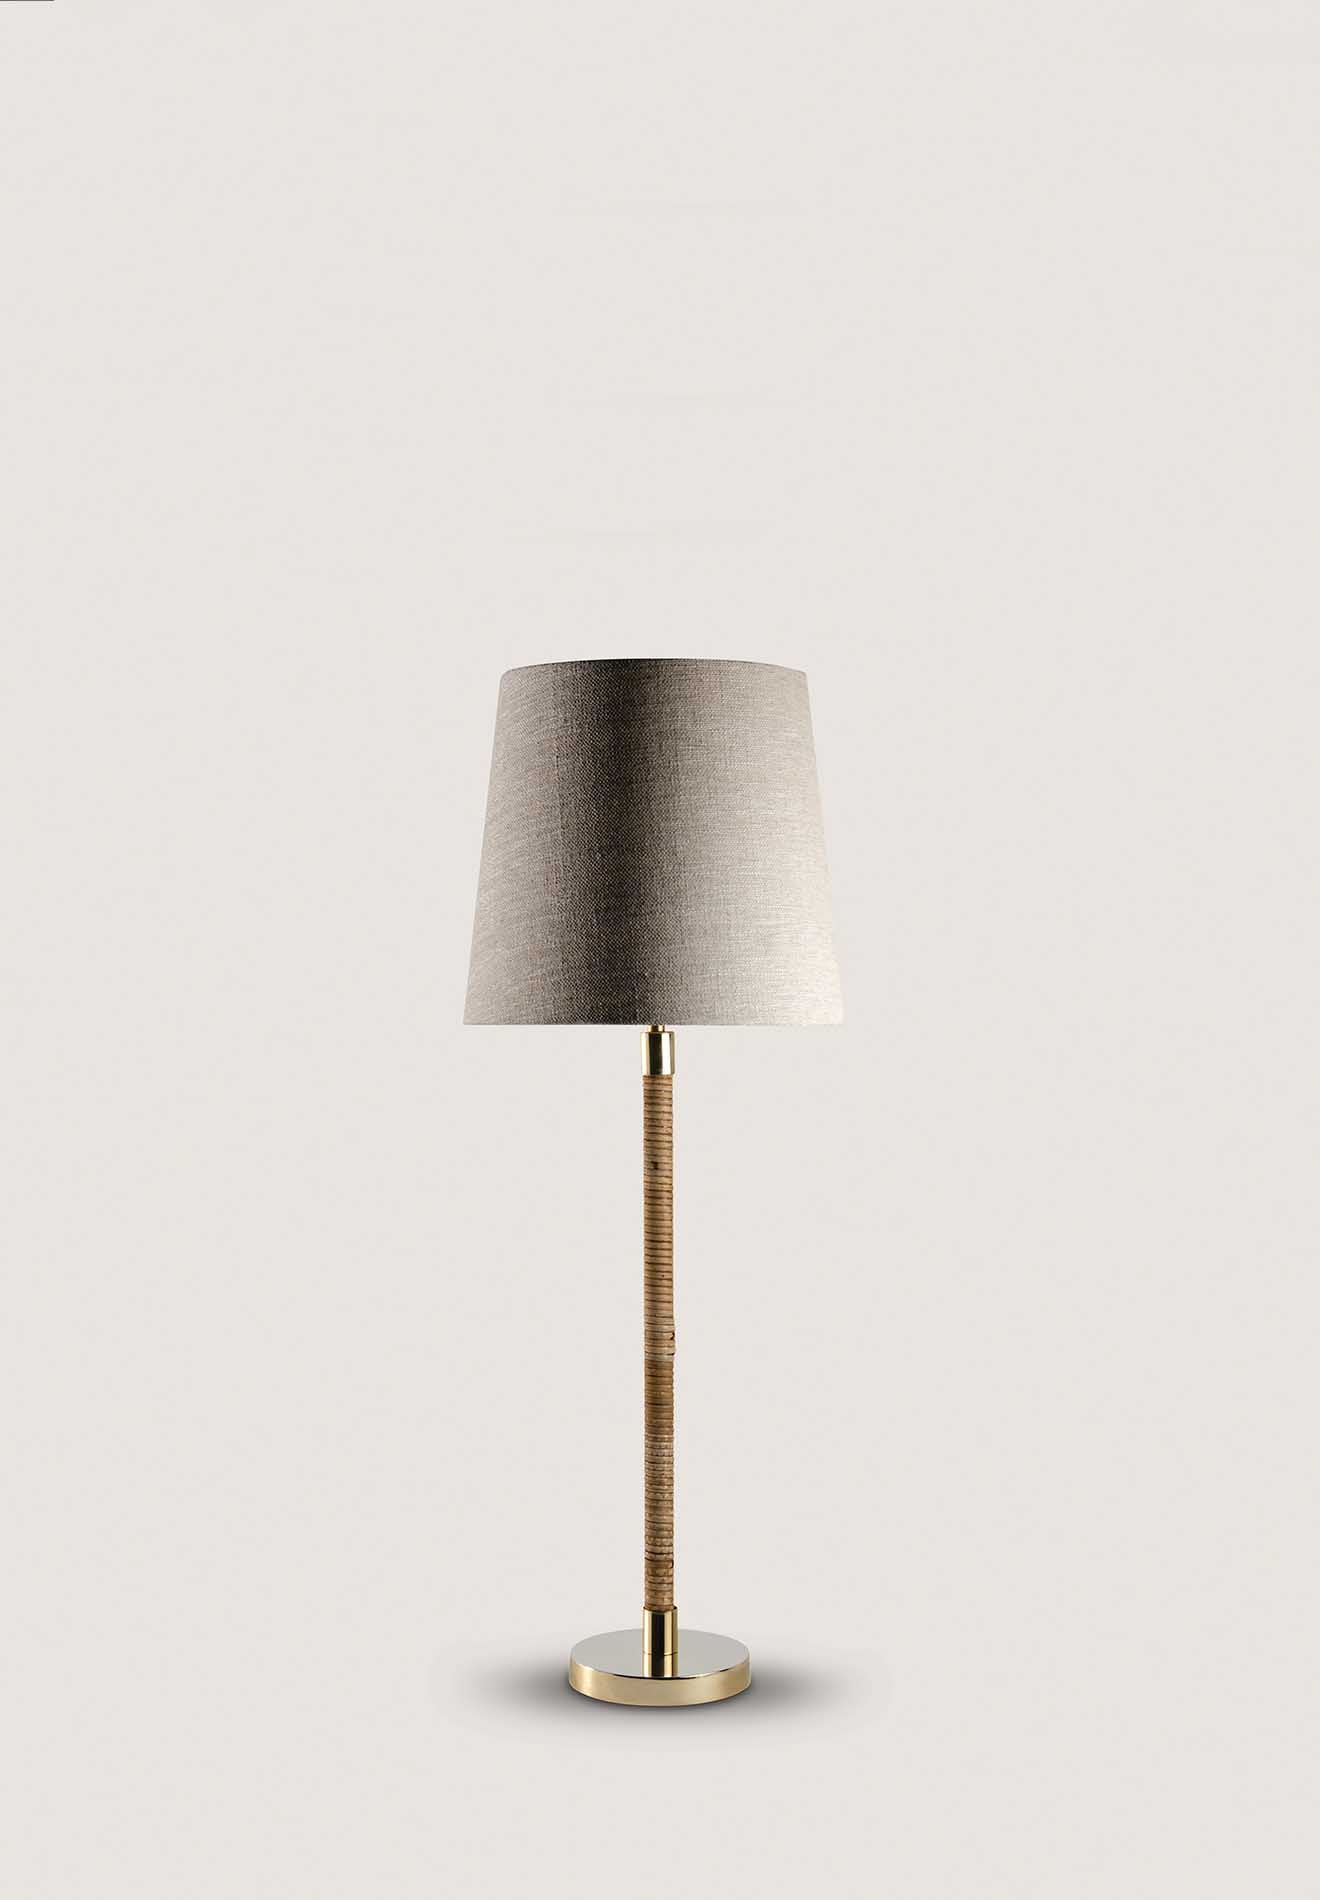 Dark Cane in Brass shown with 10" Bongo Natural Linen with Cream Card lining